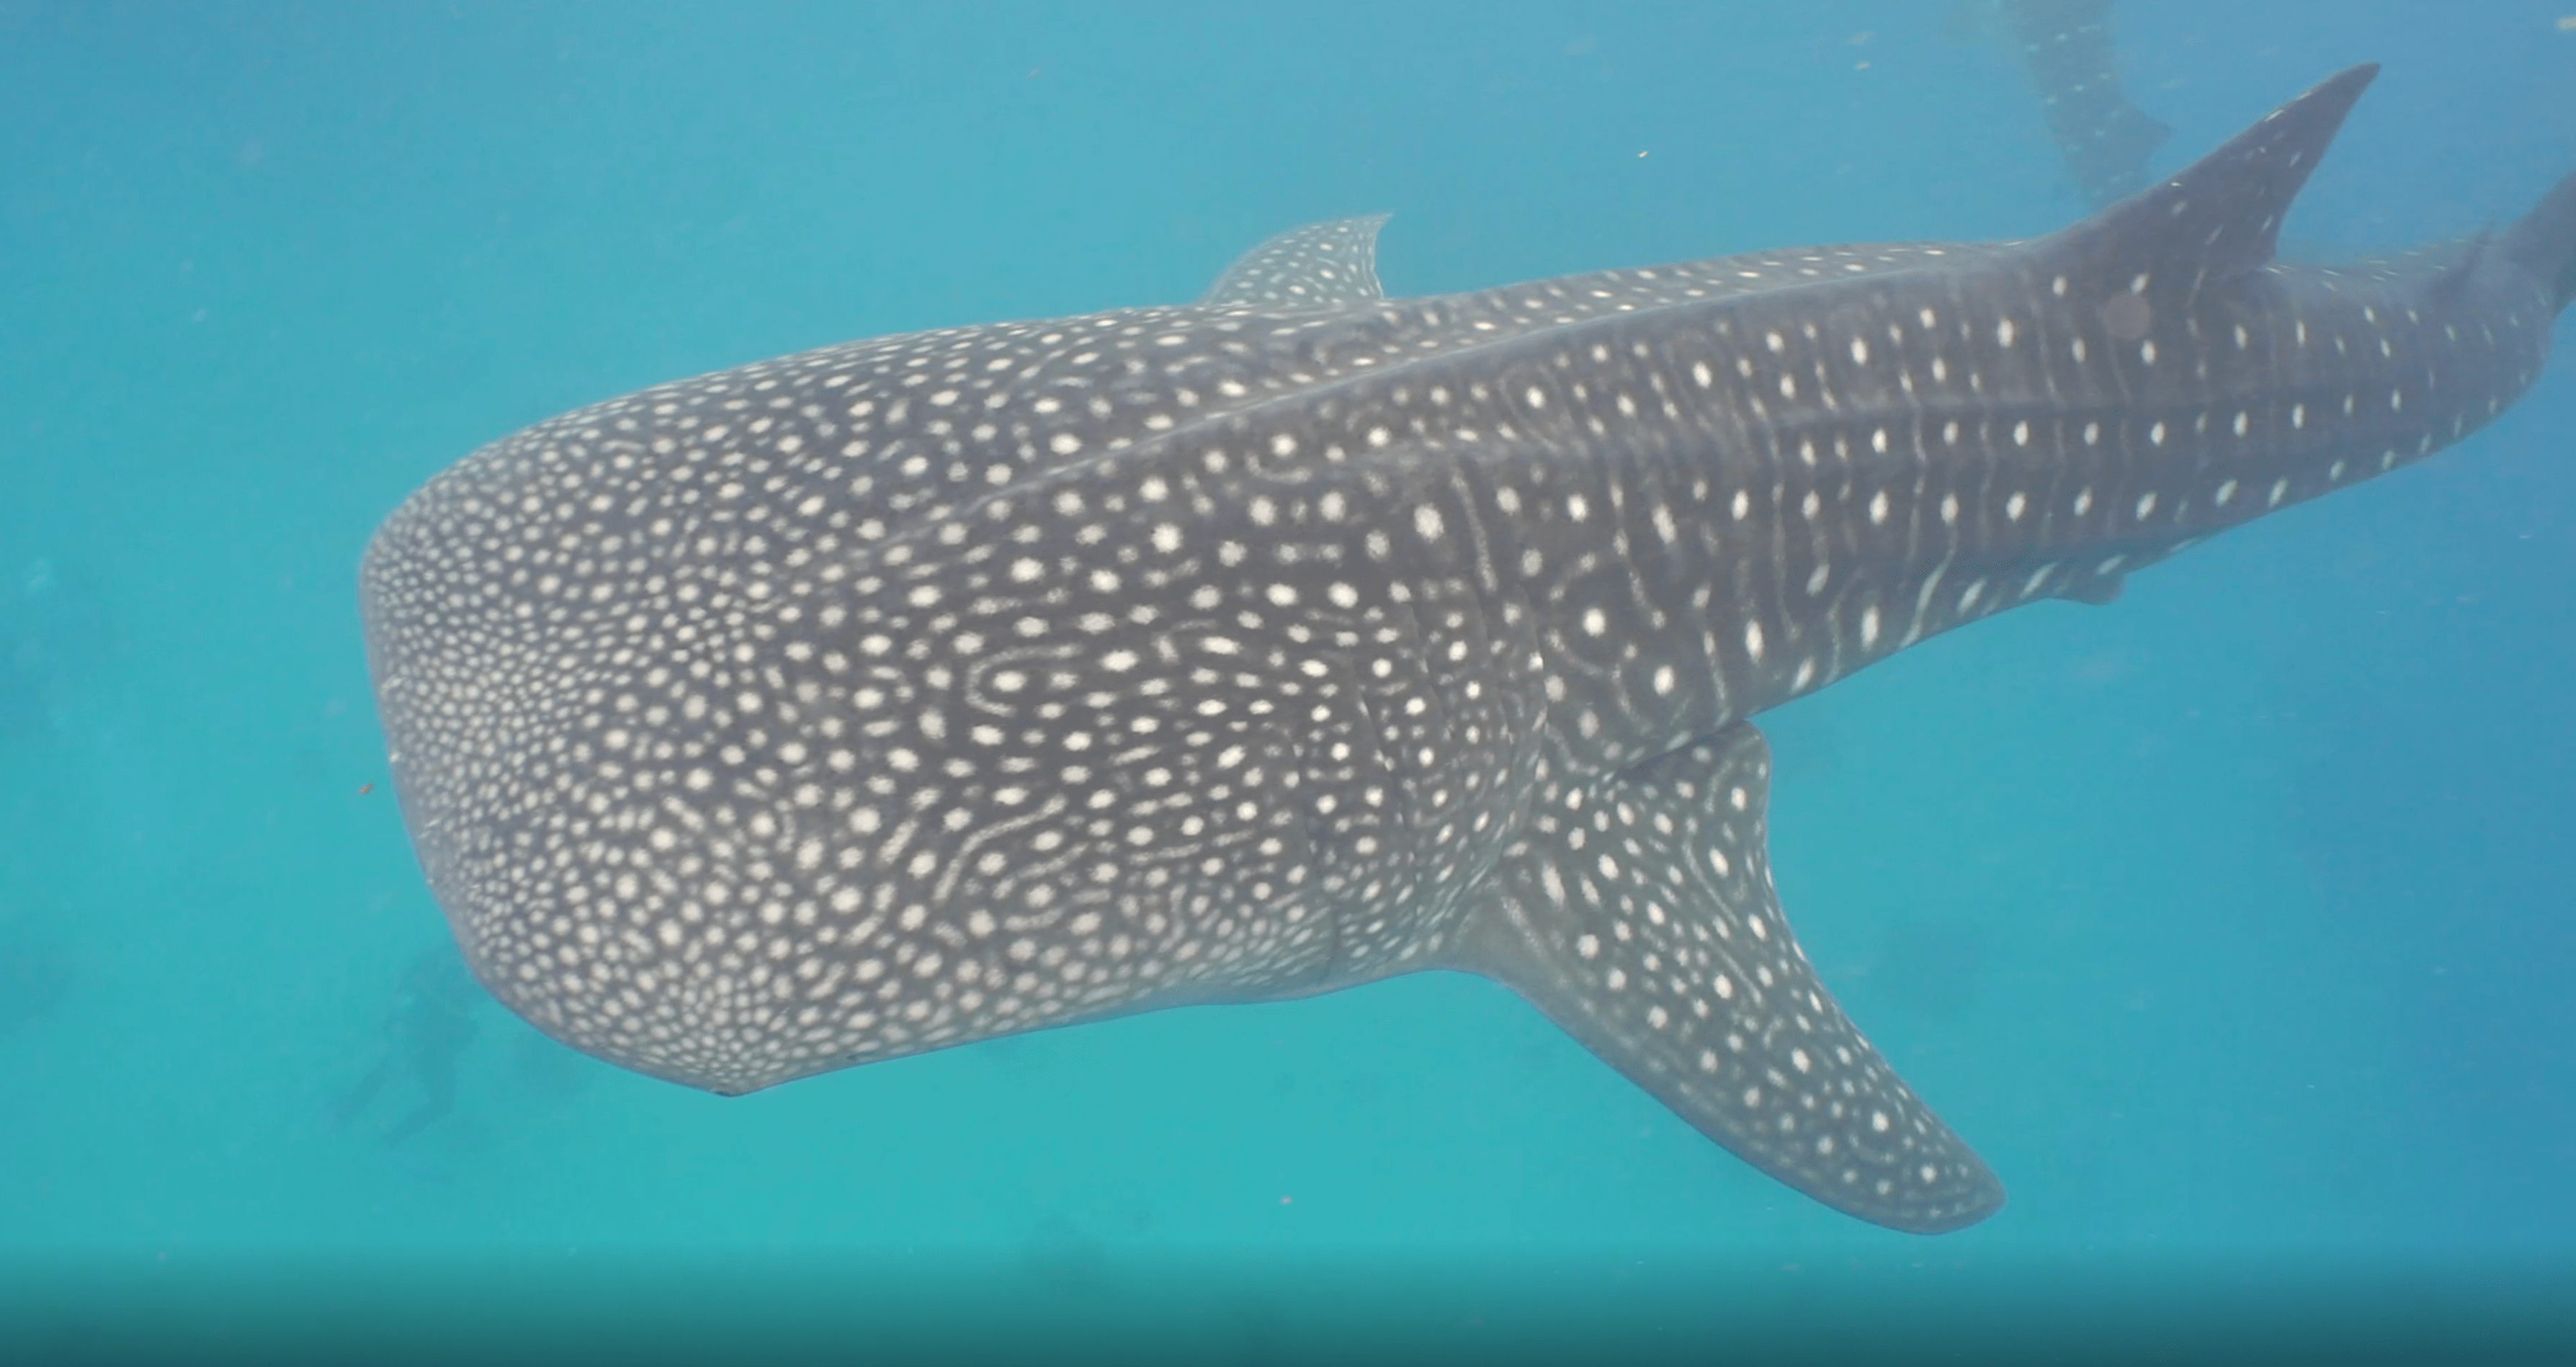 A speckle-skinned whale shark swimming in the ocean.